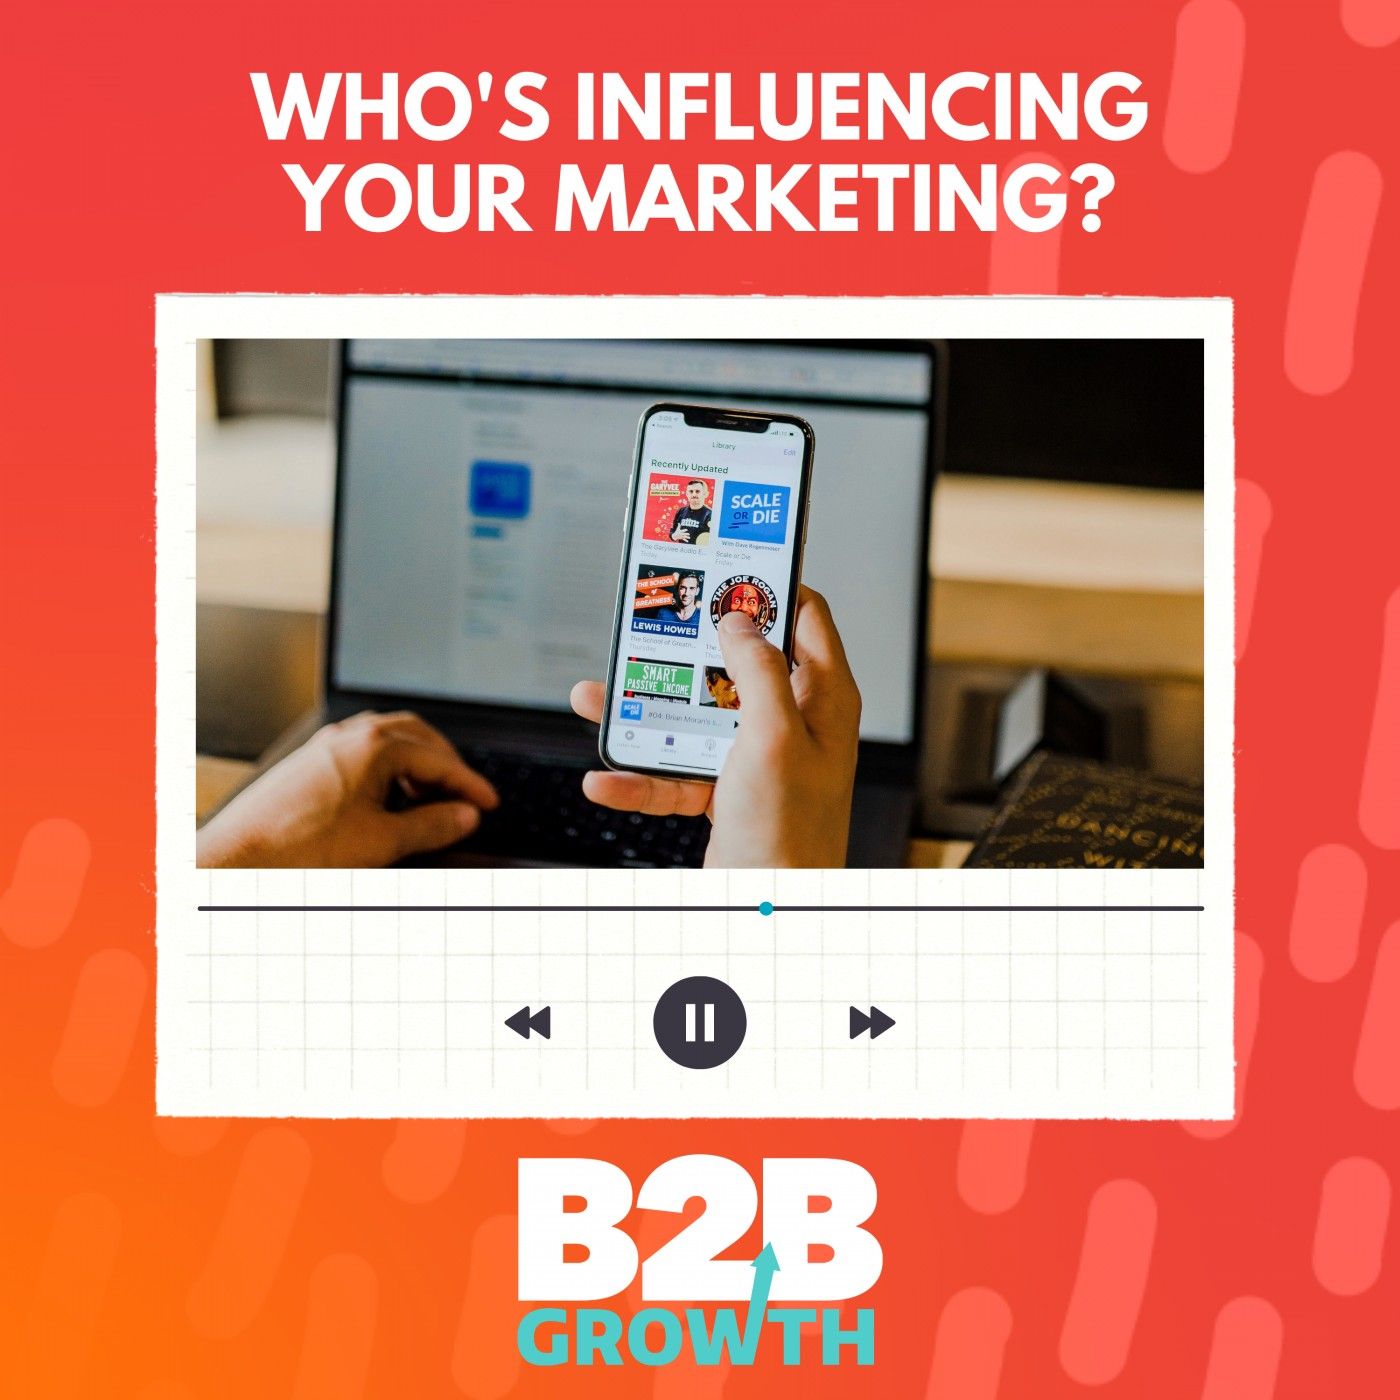 Who’s Influencing Your Marketing? | Original Research